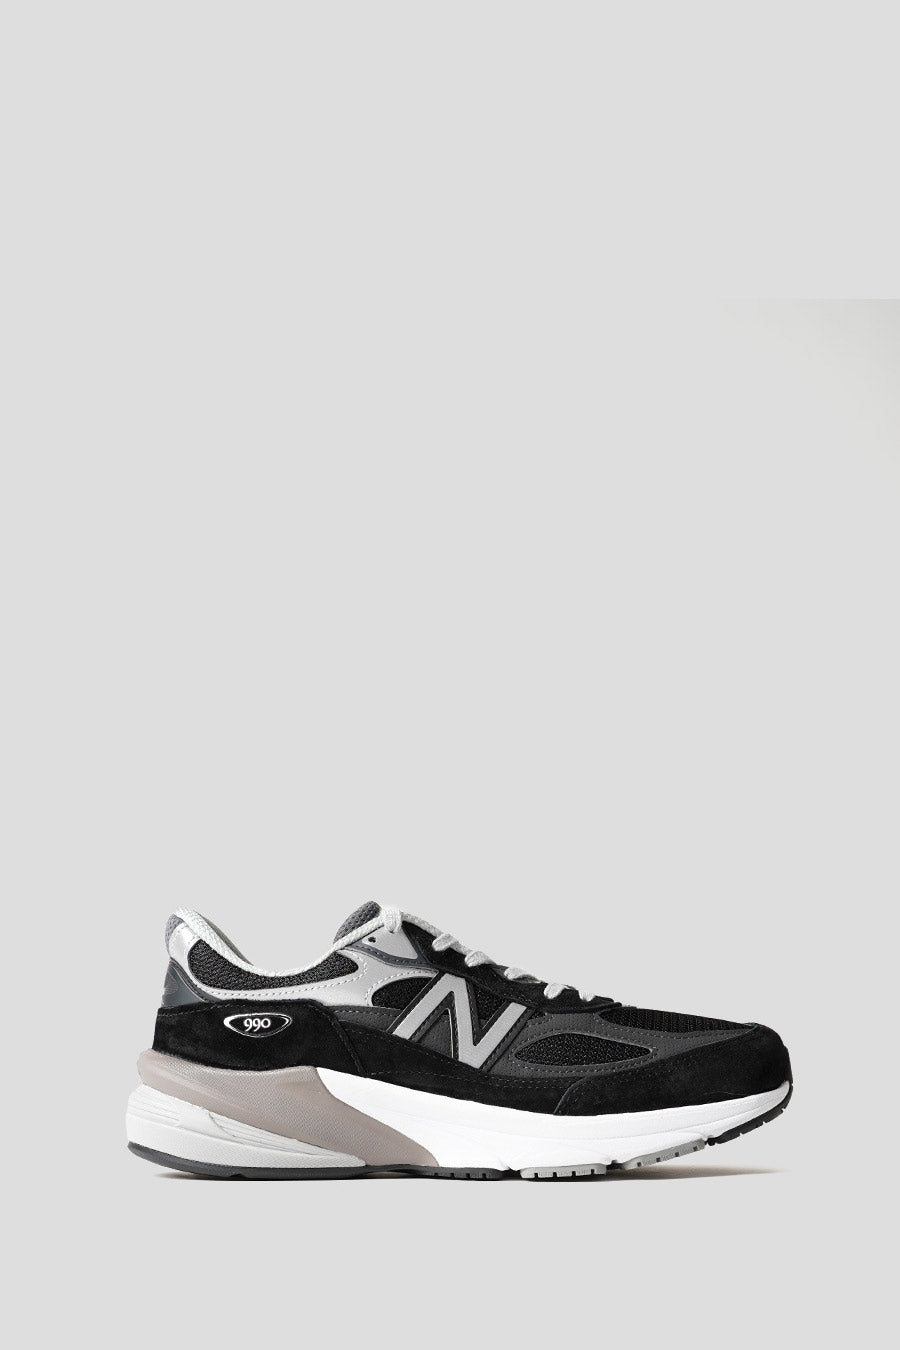 NEW BALANCE - BLACK MADE IN USA W990V6 SNEAKERS - LE LABO STORE